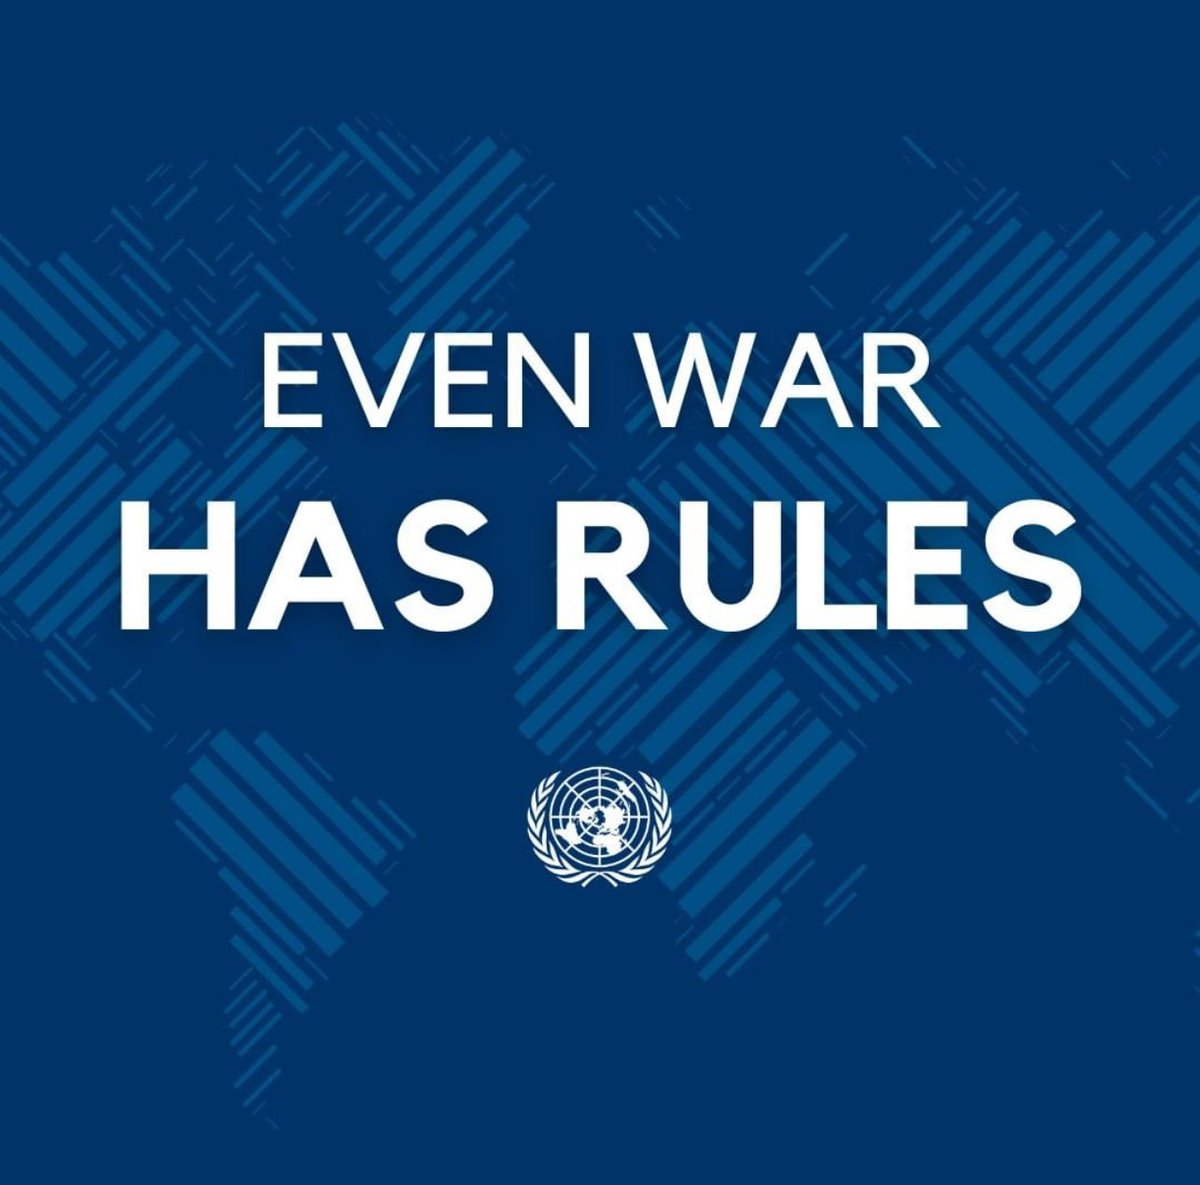 Kind reminder for all countries in conflict. #NotATarget #ProtectCivilians #Proportionality